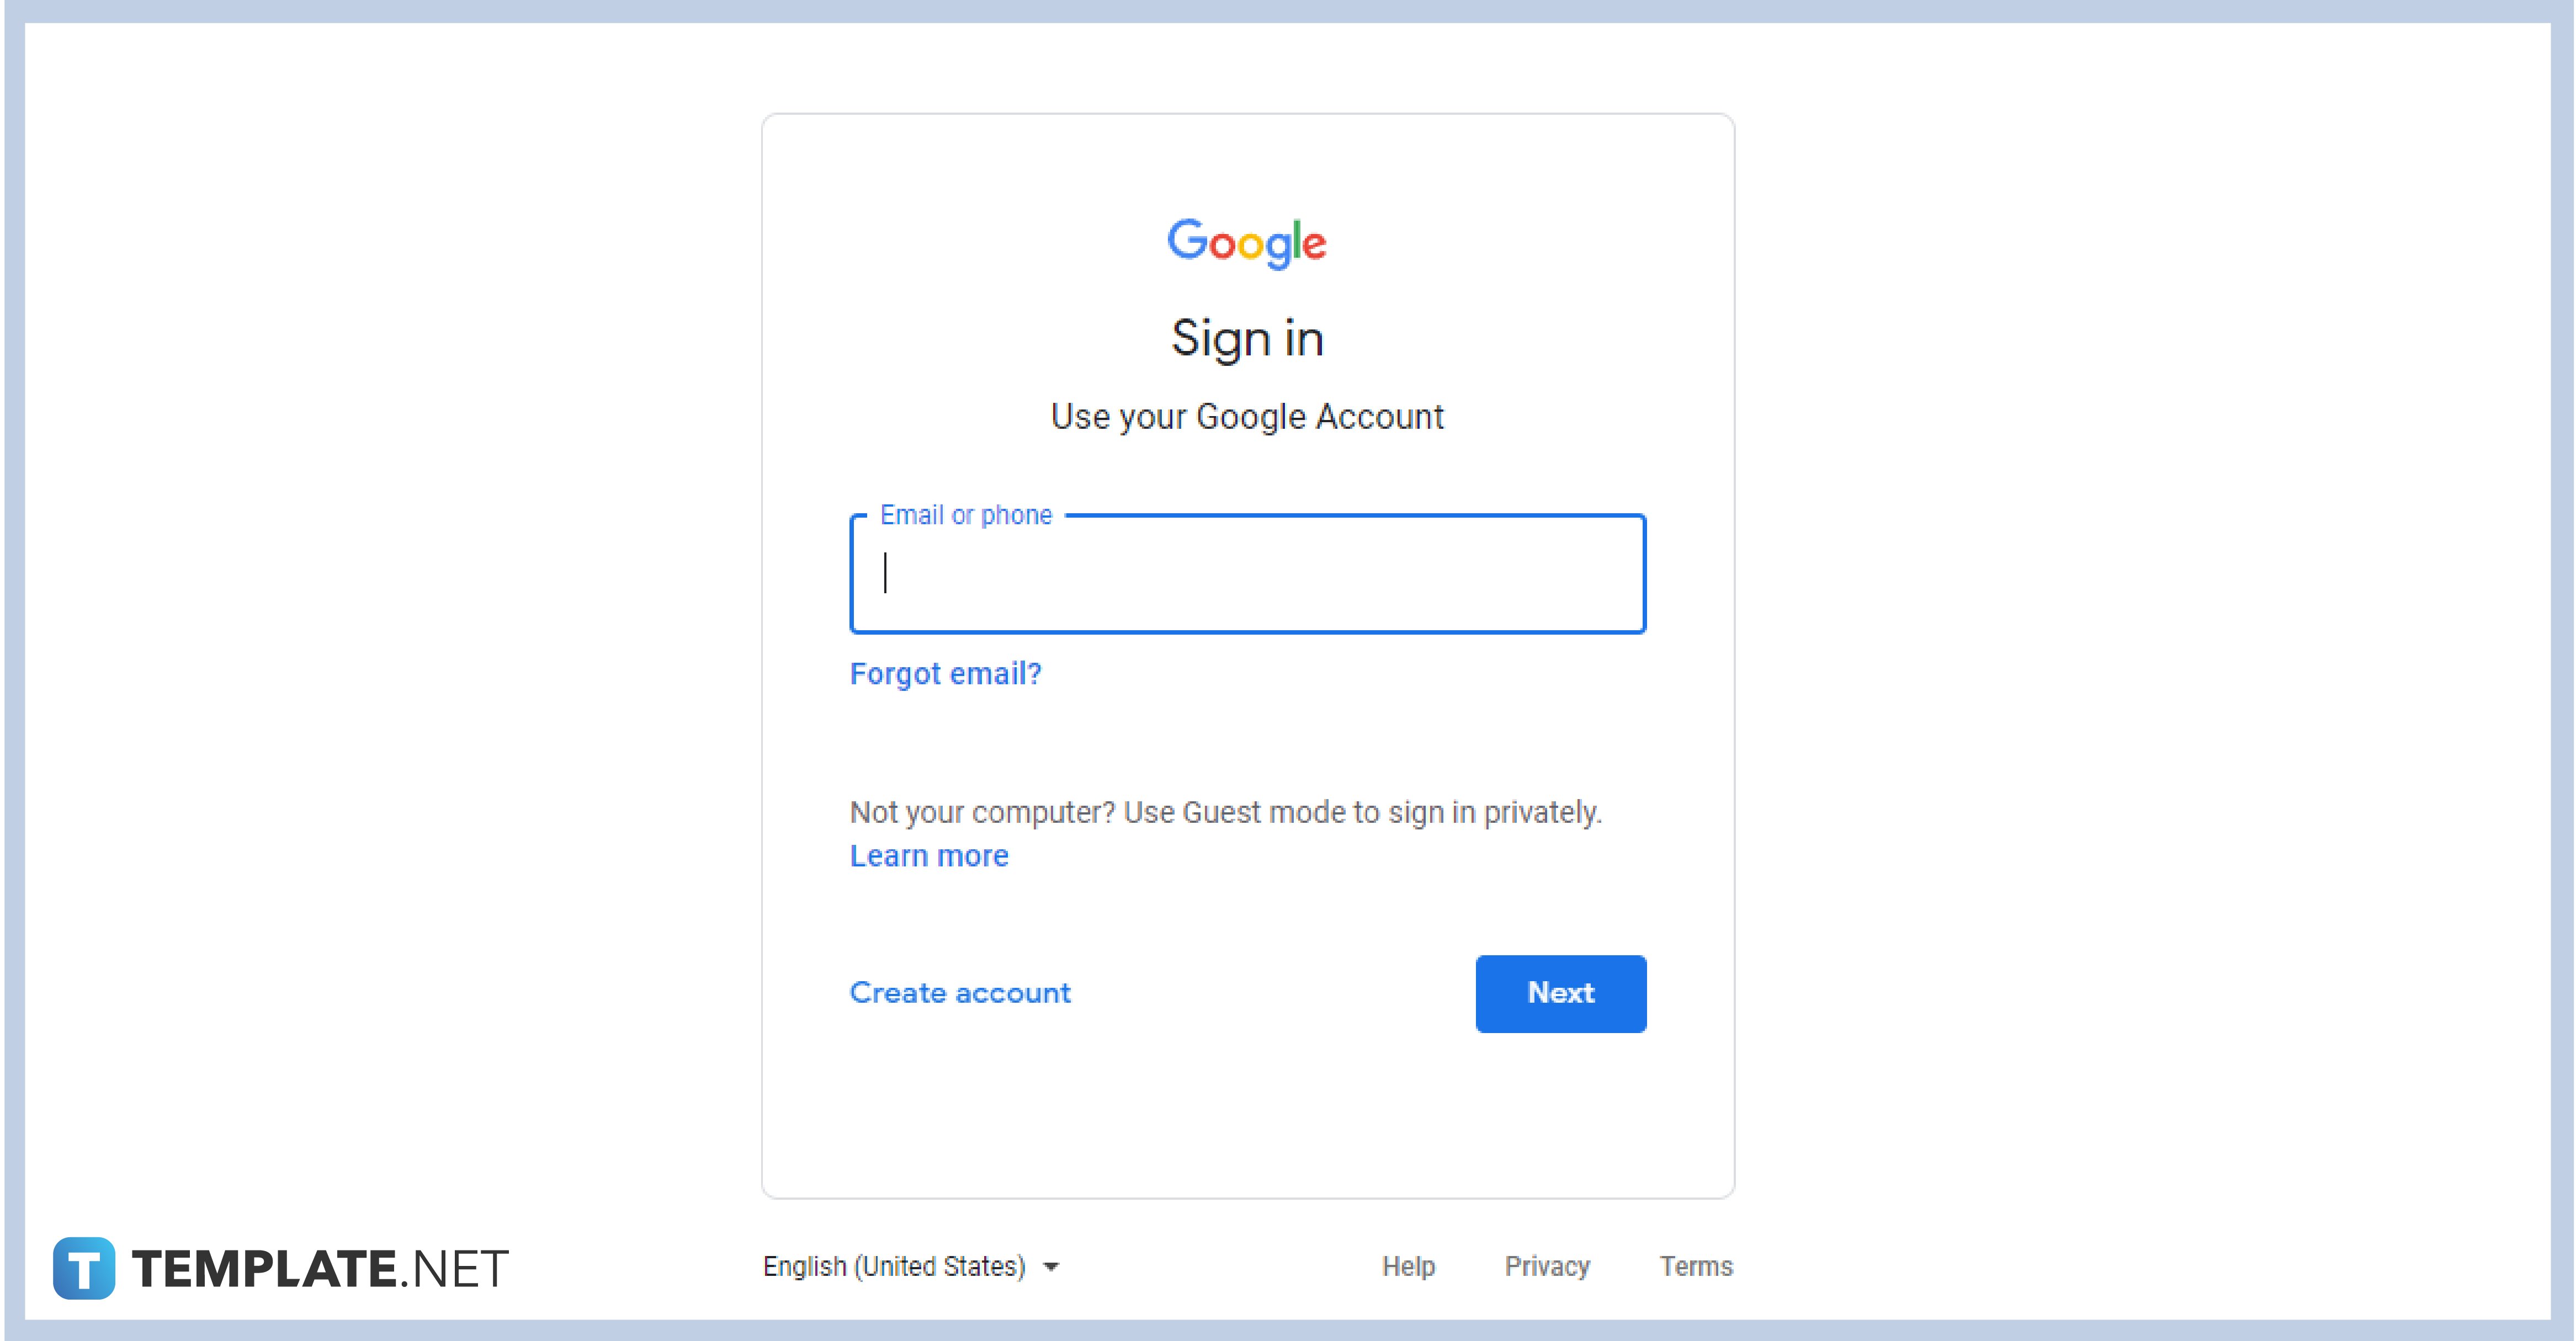 step-1-sign-in-with-your-account-0112